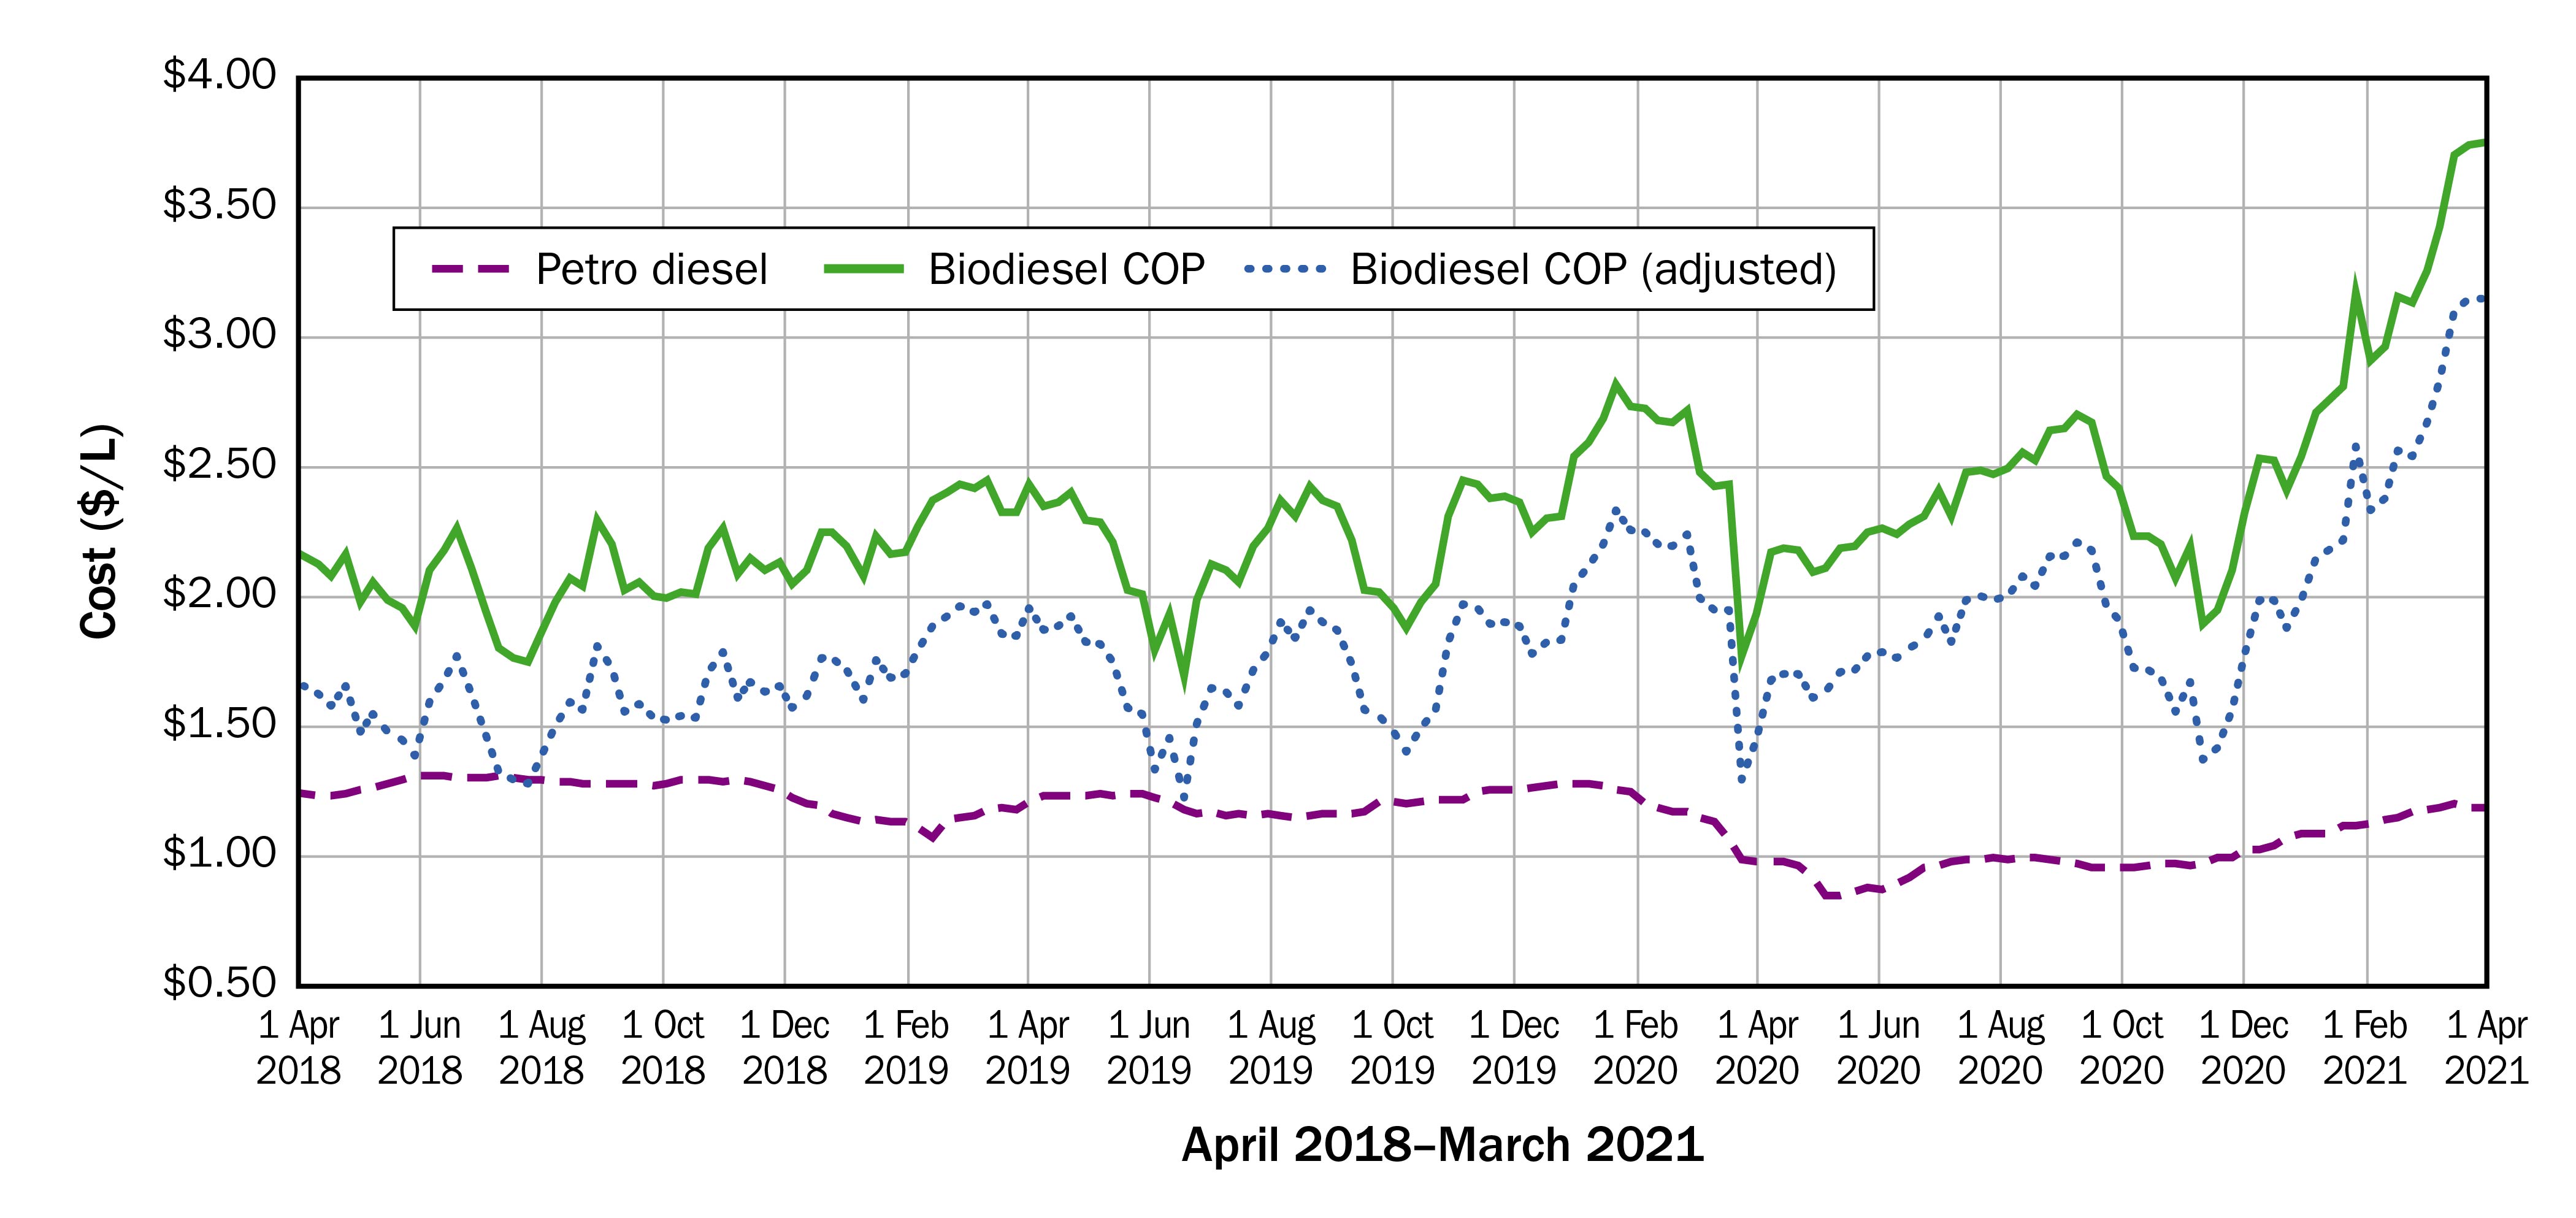 A line graph with cost ($/L) on the Y-axis and time (April 2018 to March 2021) on the X-axis comparing the opportunity cost of producing biodiesel on-farm instead of selling the soybeans on the commodity market. Two assumption scenarios are shown, but for both assumptions the graphed lines show, despite fluctuations in values over time, it was consistently cheaper to purchase petro-diesel than produce biodiesel from soybeans.